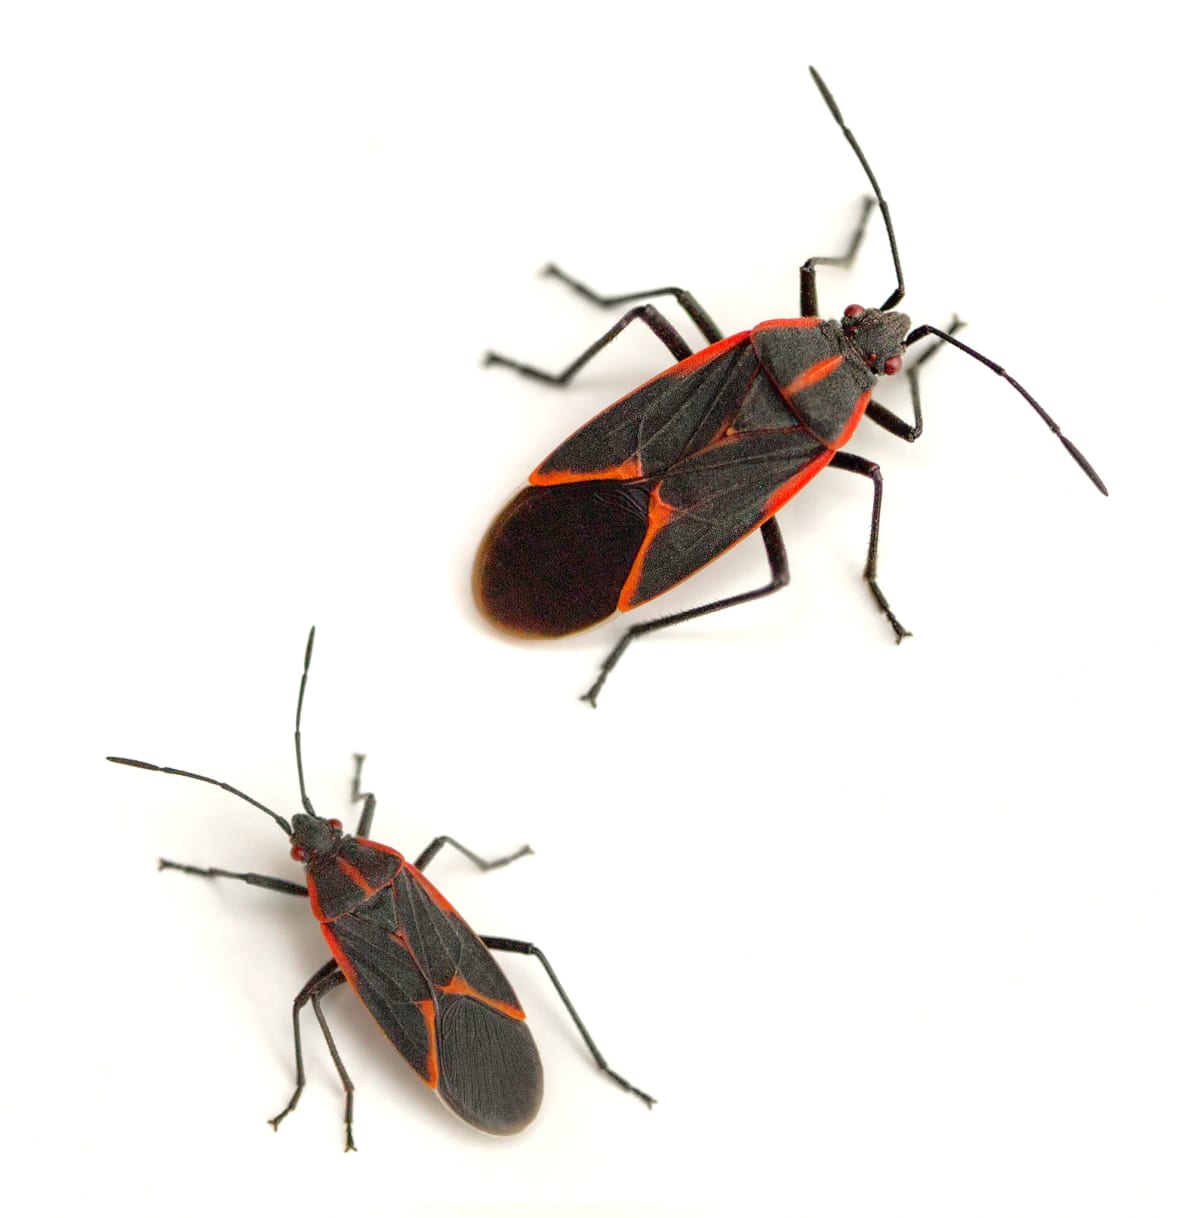 Boxelder bugs on a white surface